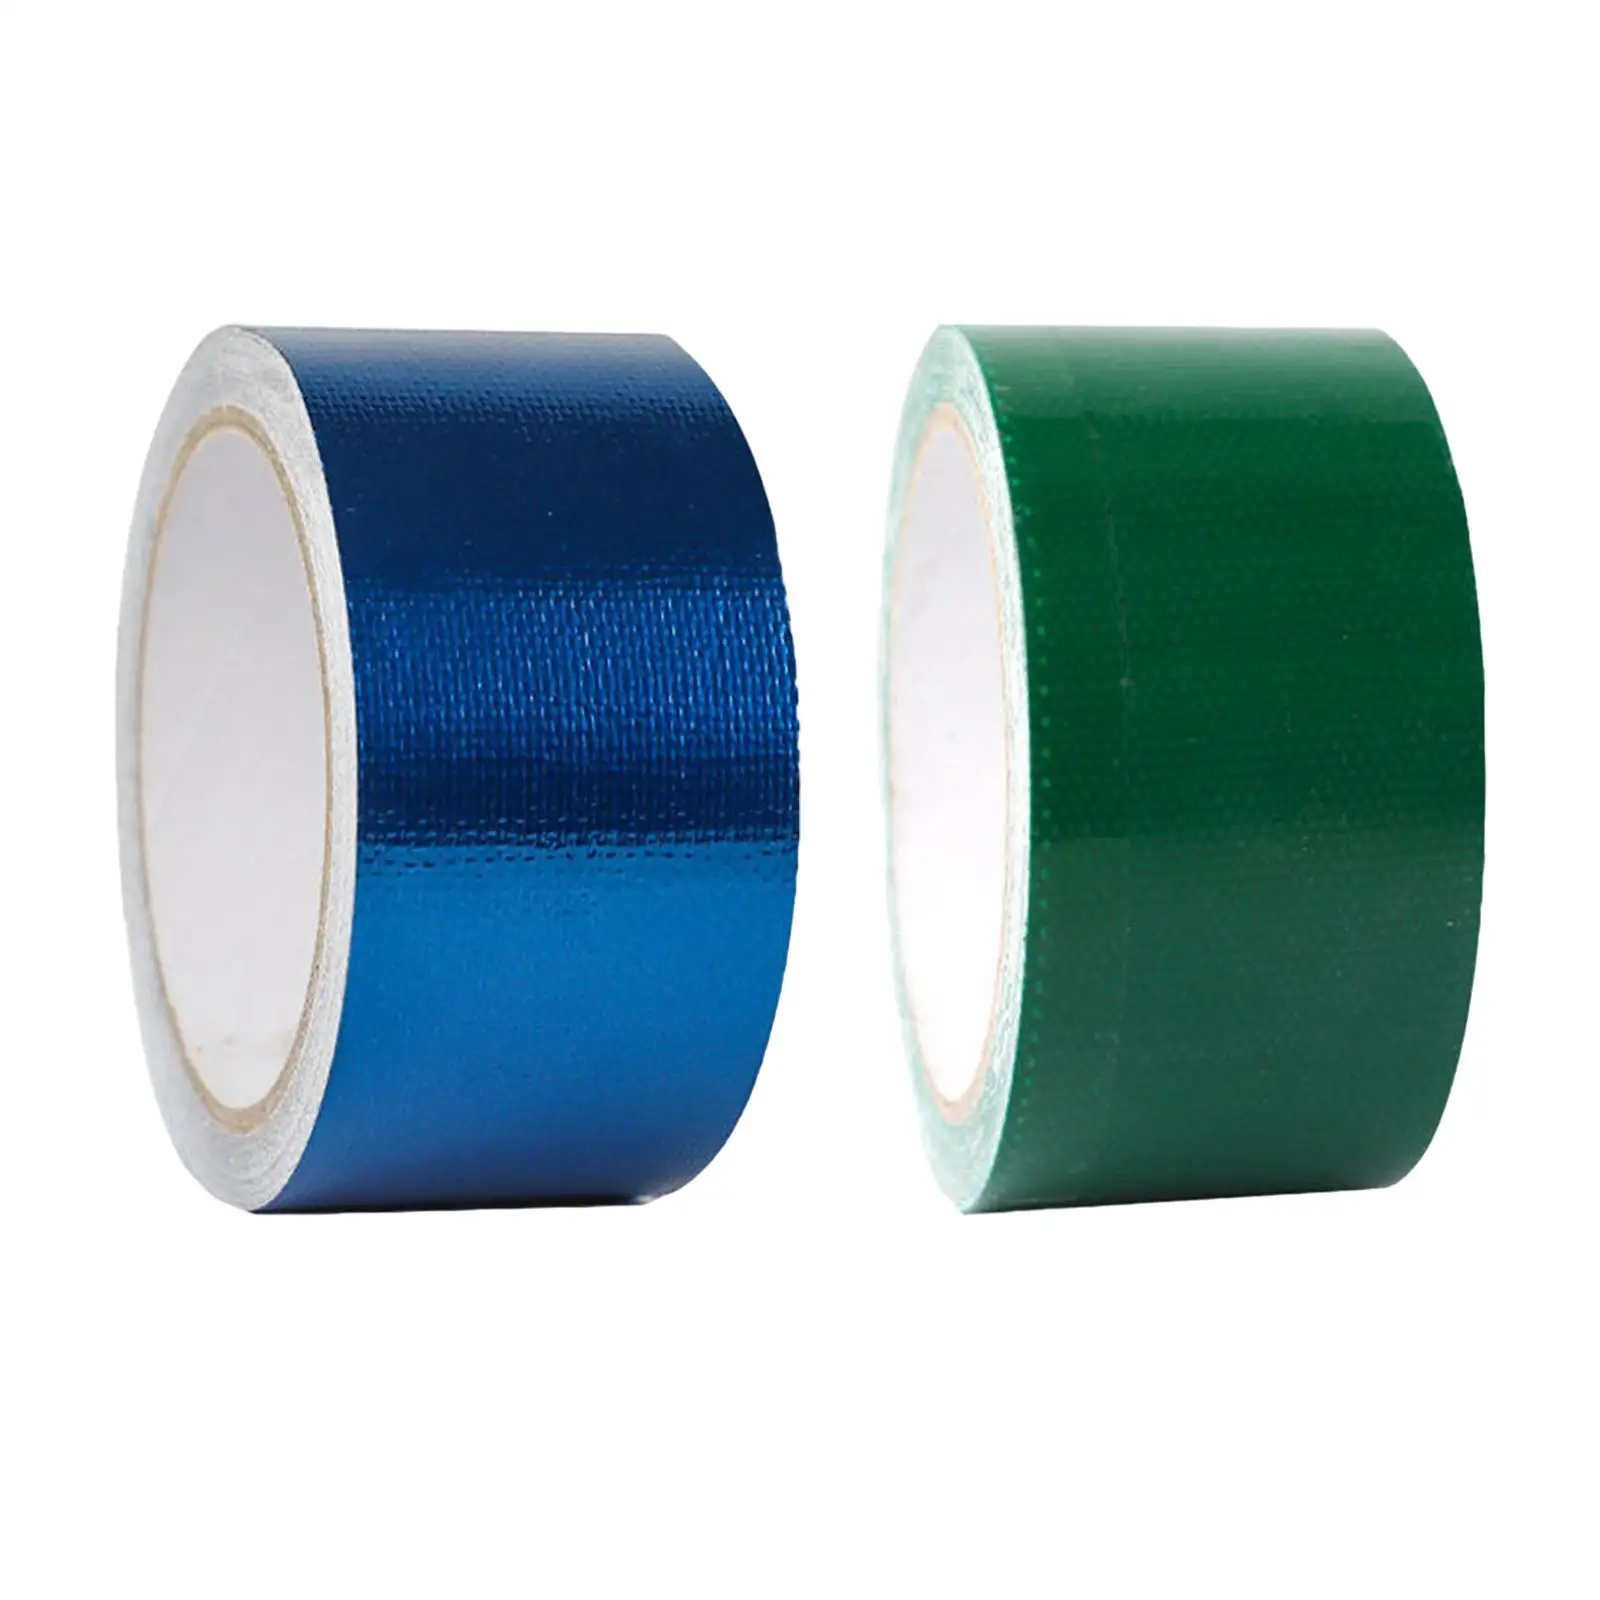 Tent Repair Tape Universal Strong Tape RV Awning Repair Tape 7.5M for Inflatable